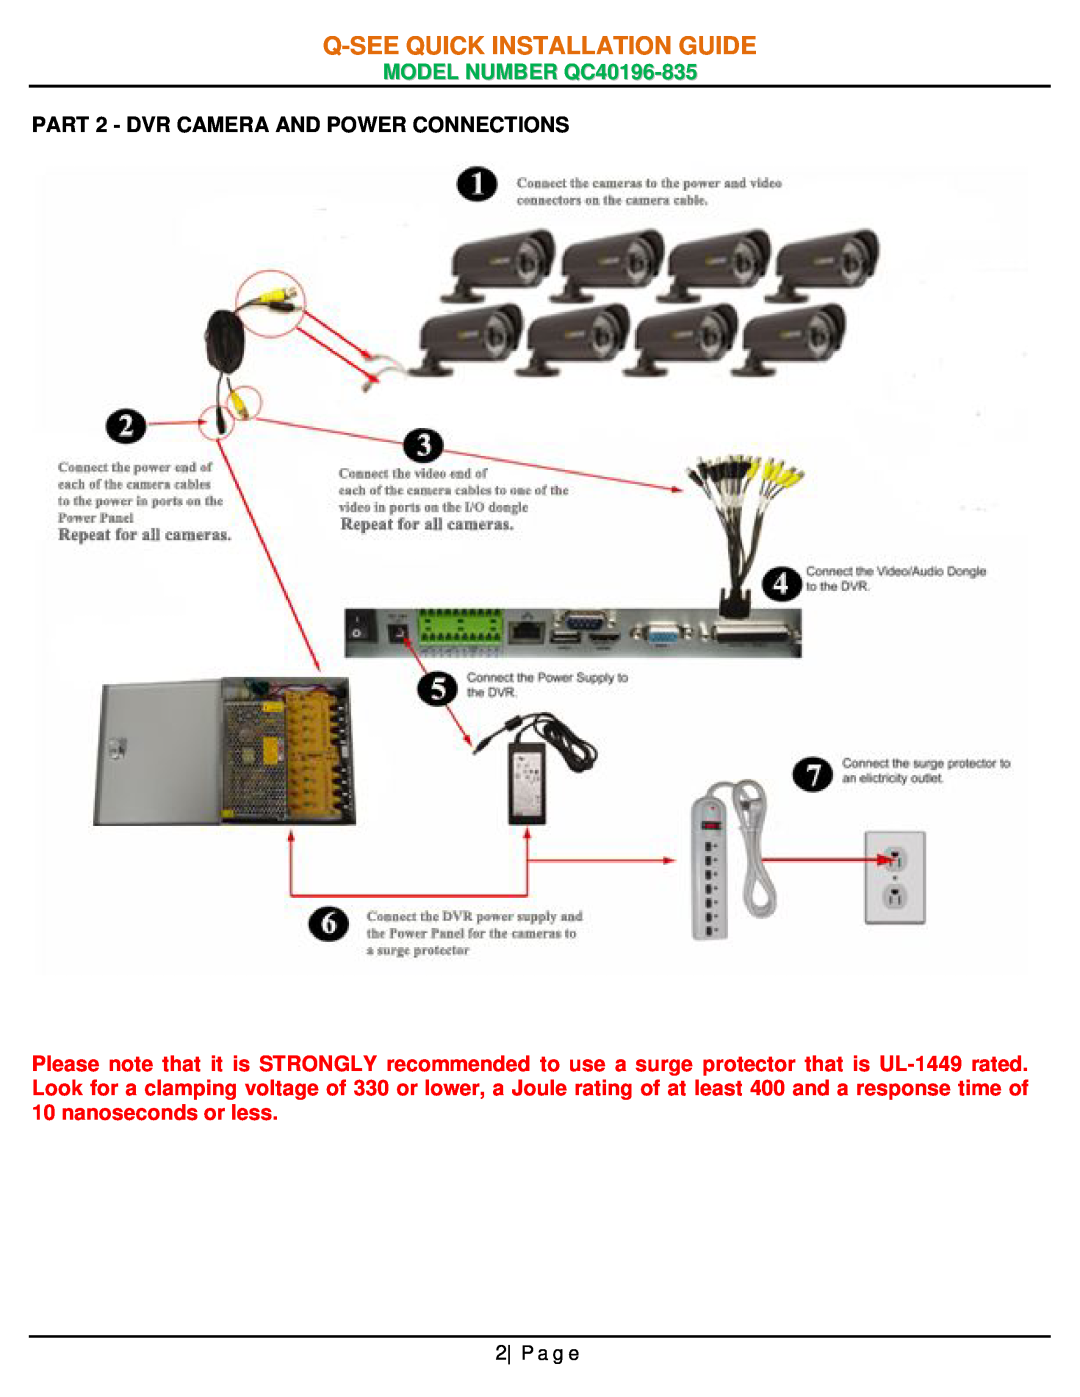 Q-See QC40196-835 manual PART 2 - DVR CAMERA AND POWER CONNECTIONS, P a g e, Q-See Quick Installation Guide 